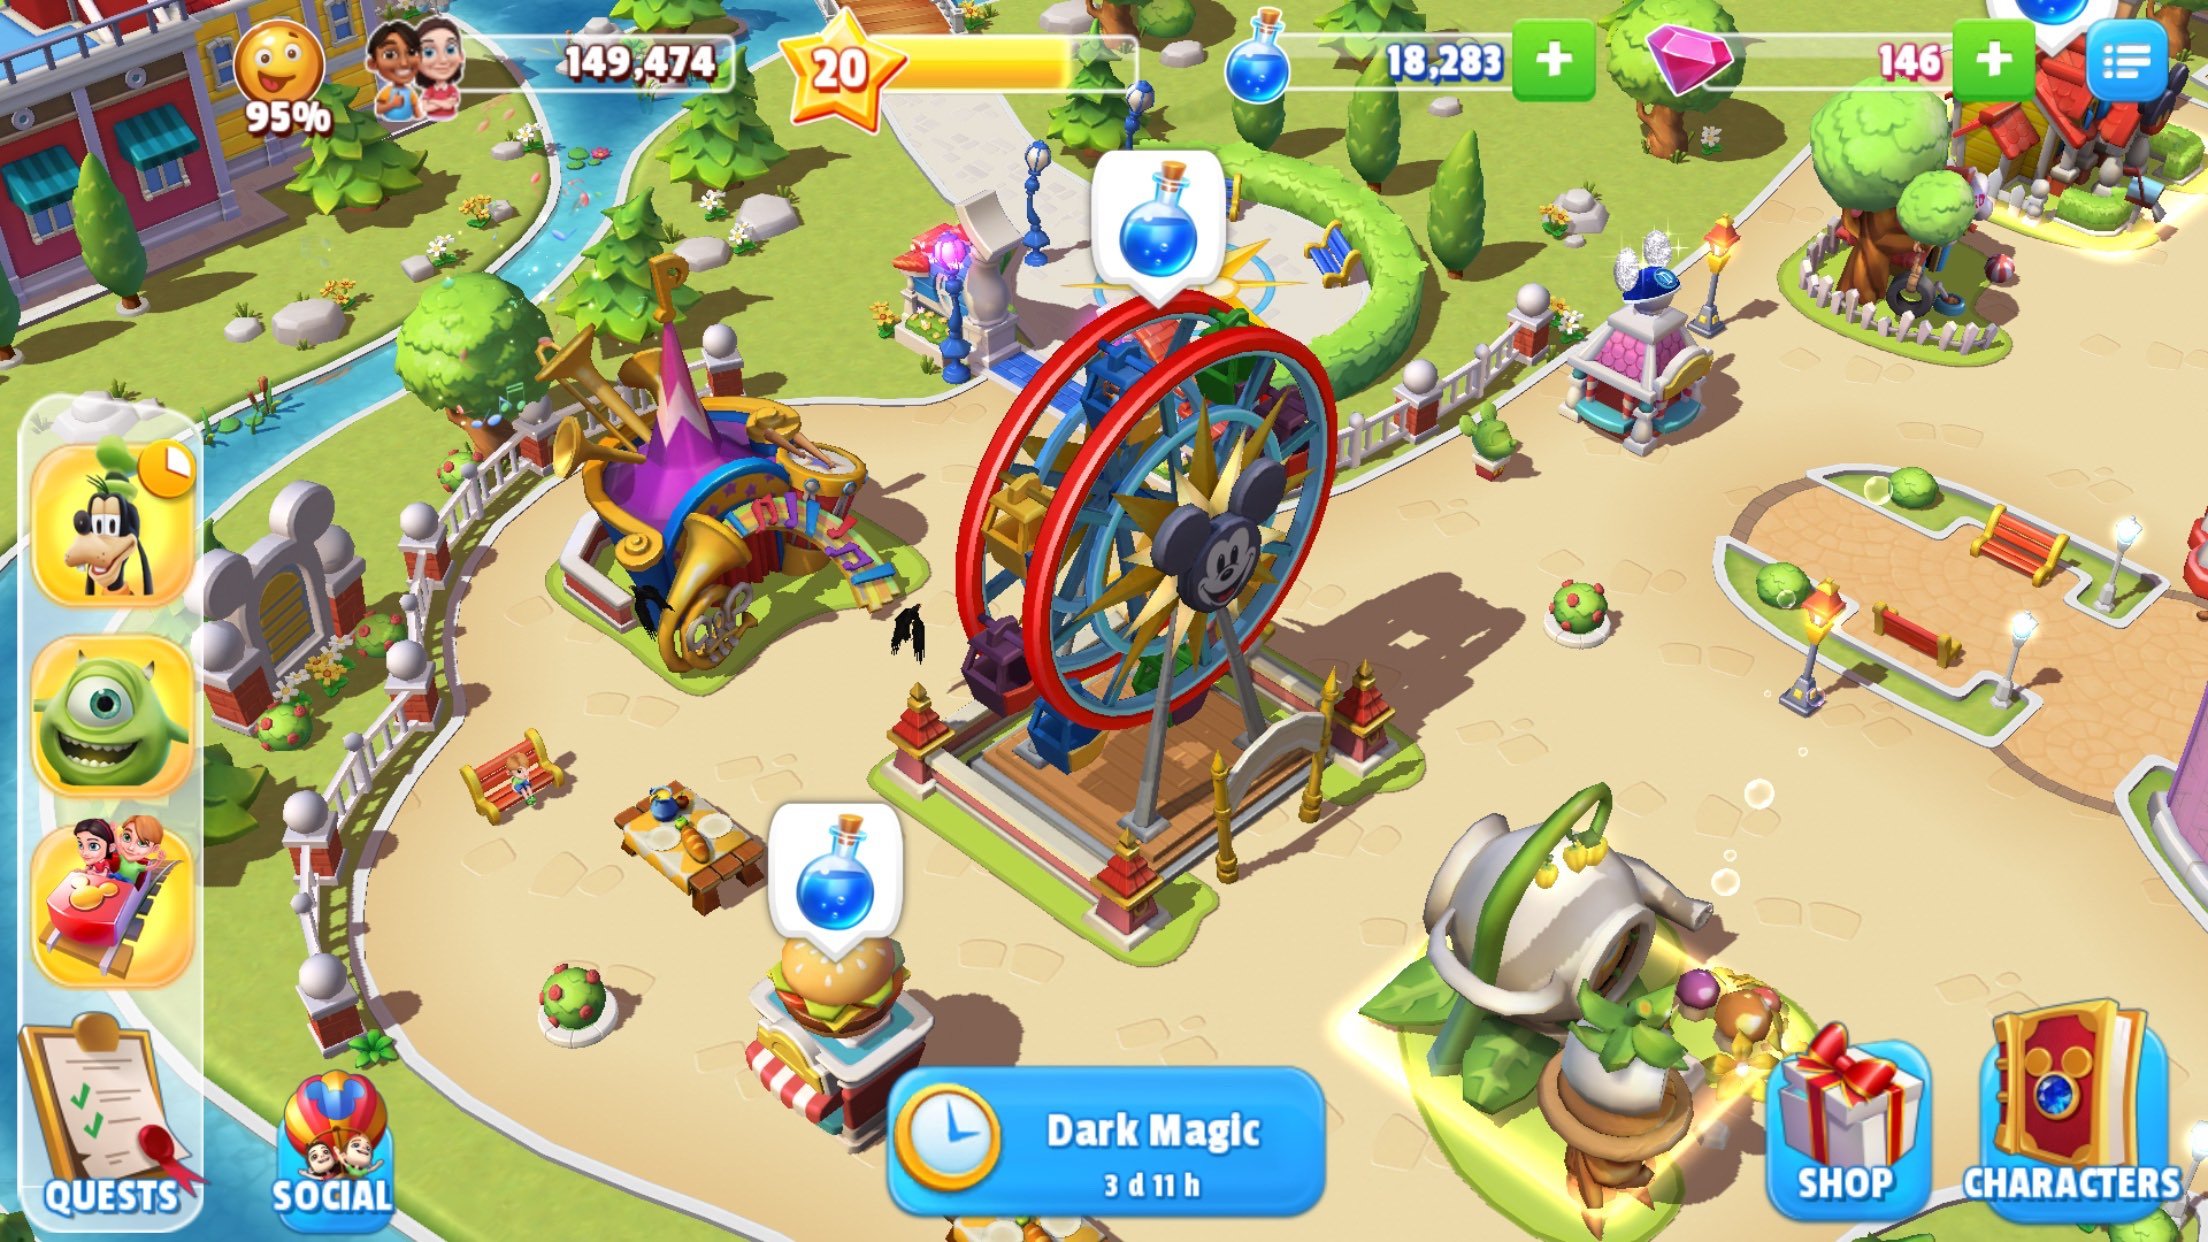 how many quest do the disney magic kingdoms game characters have to do